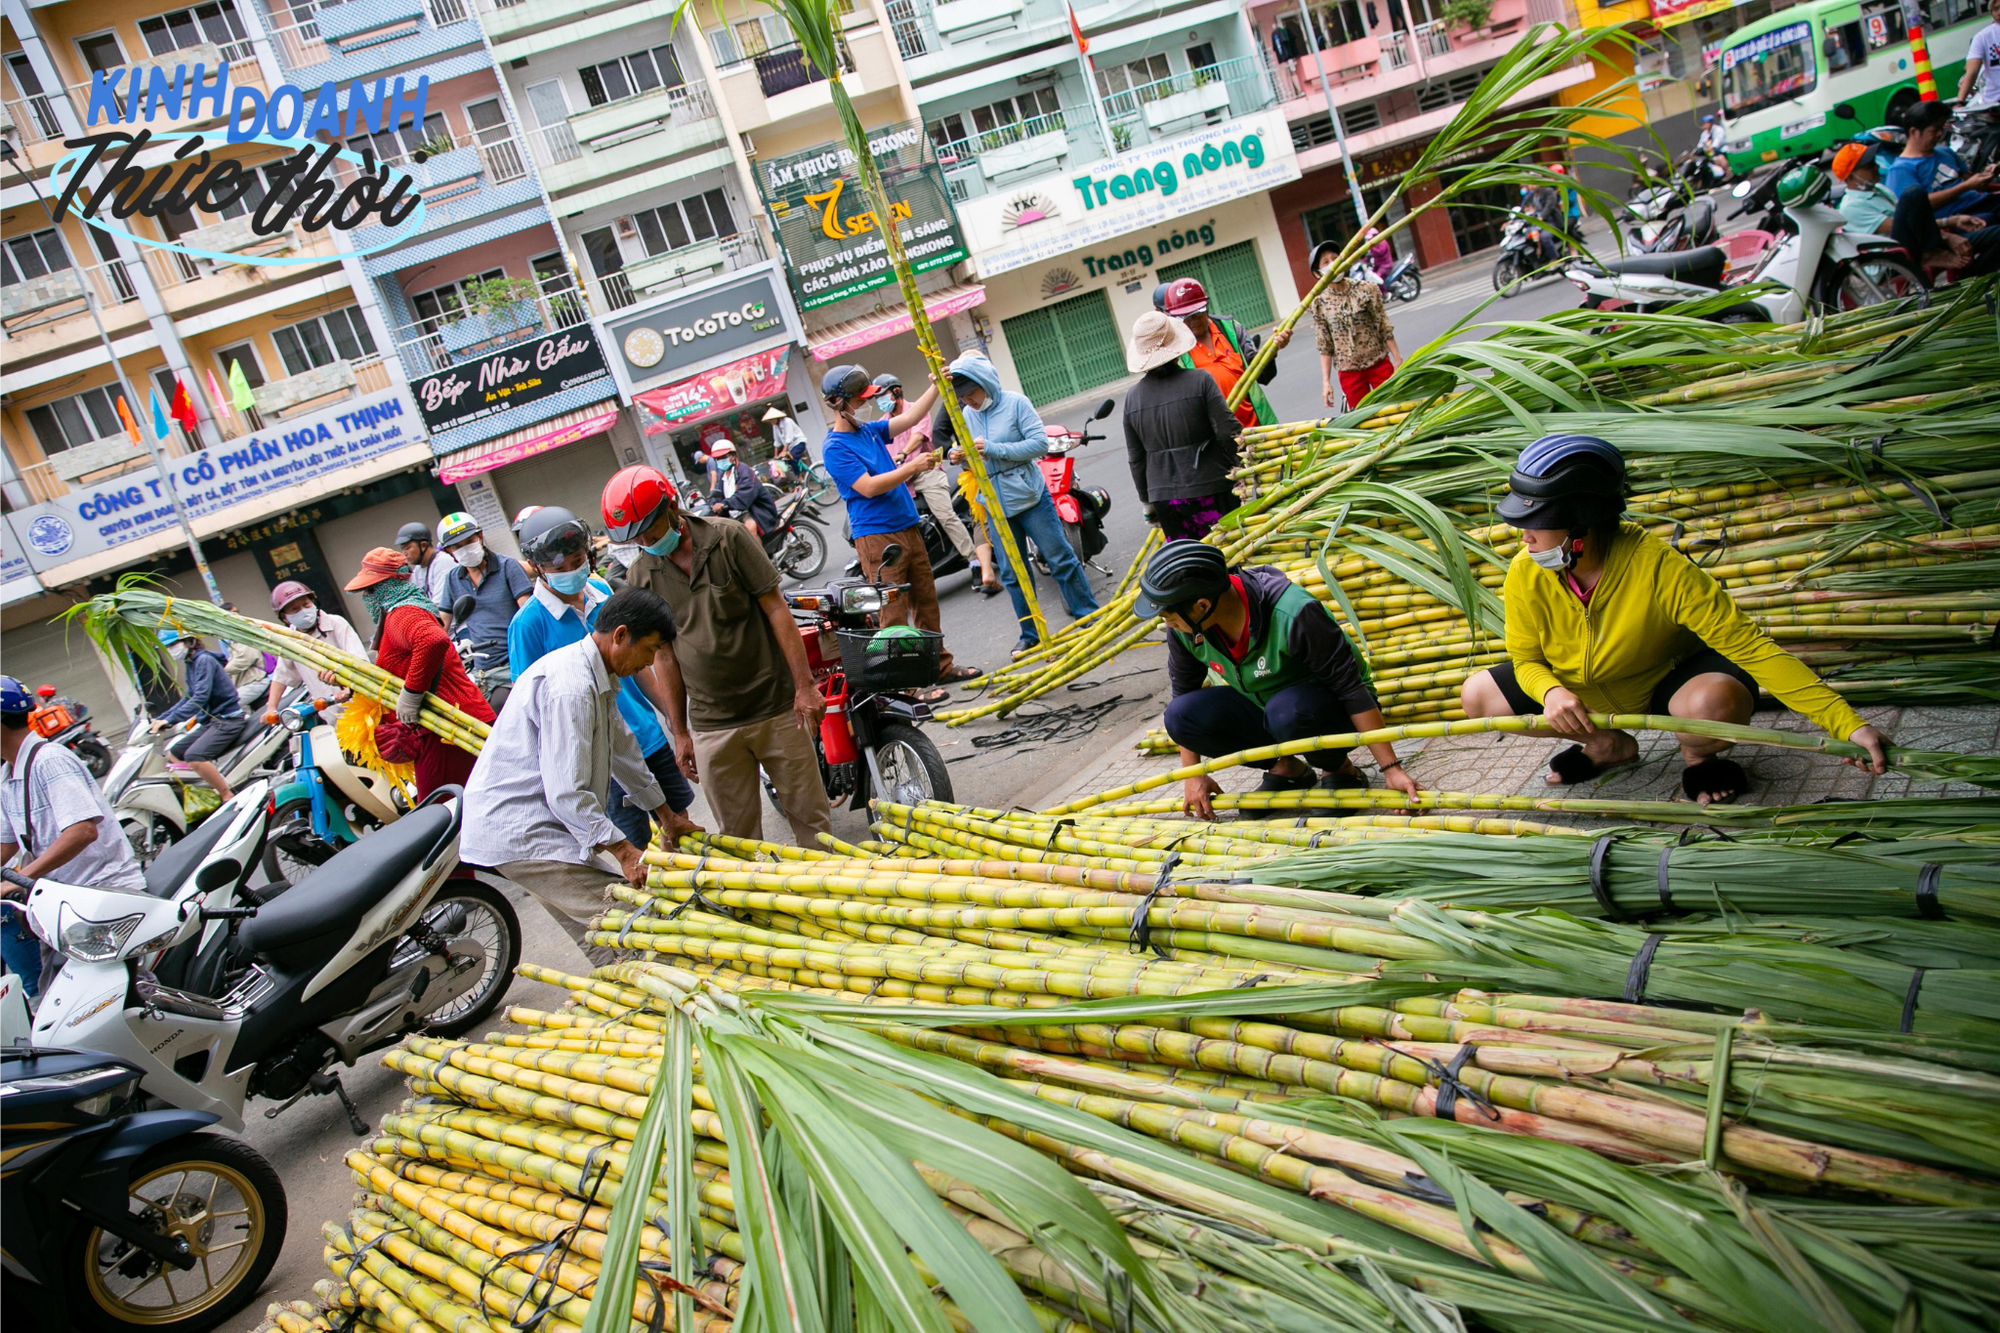 Earn tens of millions in less than 24 hours thanks to the custom of buying golden sugarcane to worship God in Saigon - Photo 1.